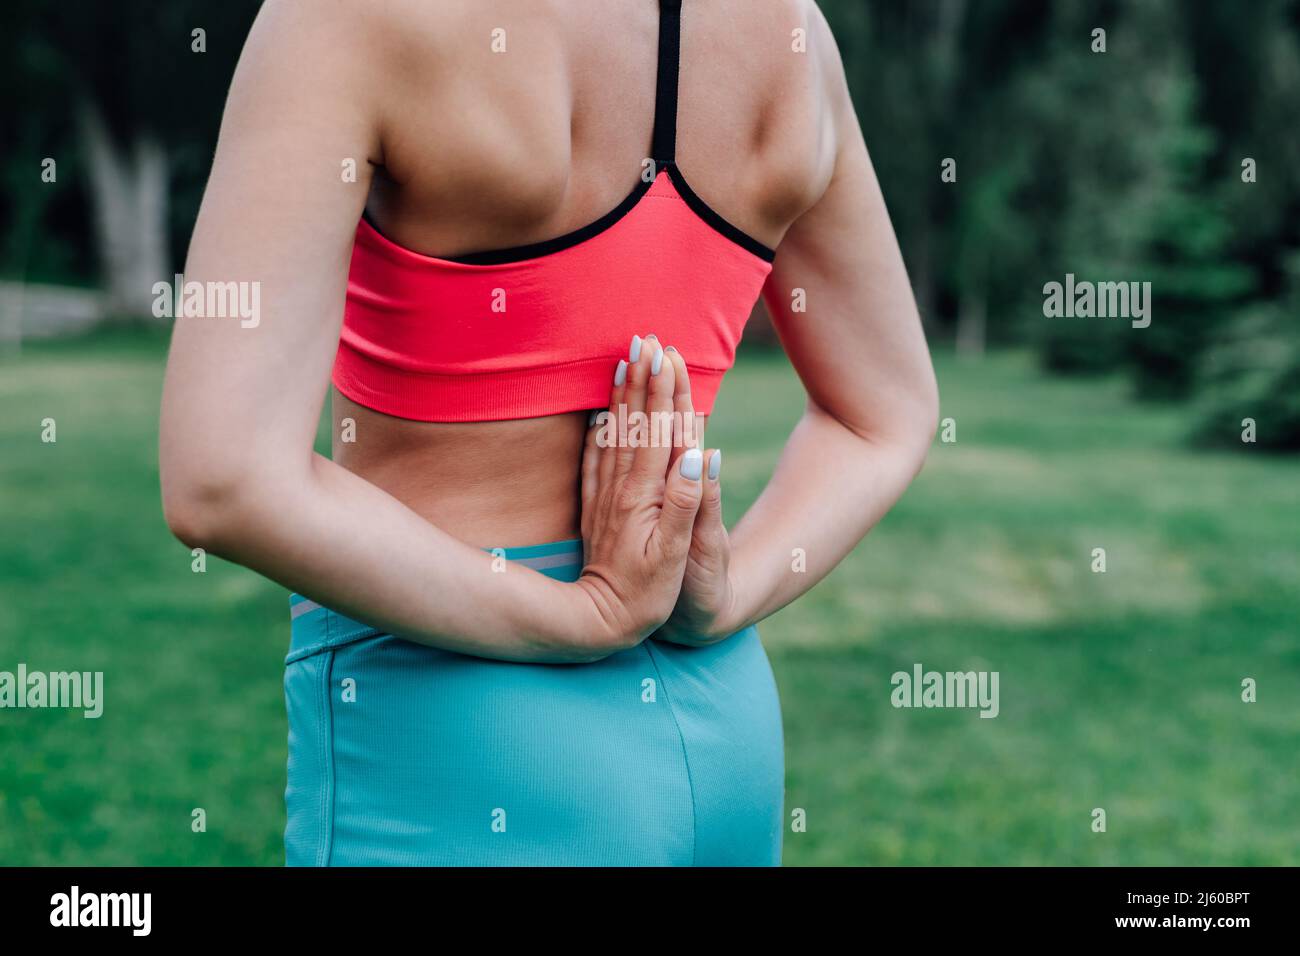 Exercises for proper posture. Body of young woman with her palms folded behind her back in Paschima Namaskarasana asana pose Stock Photo